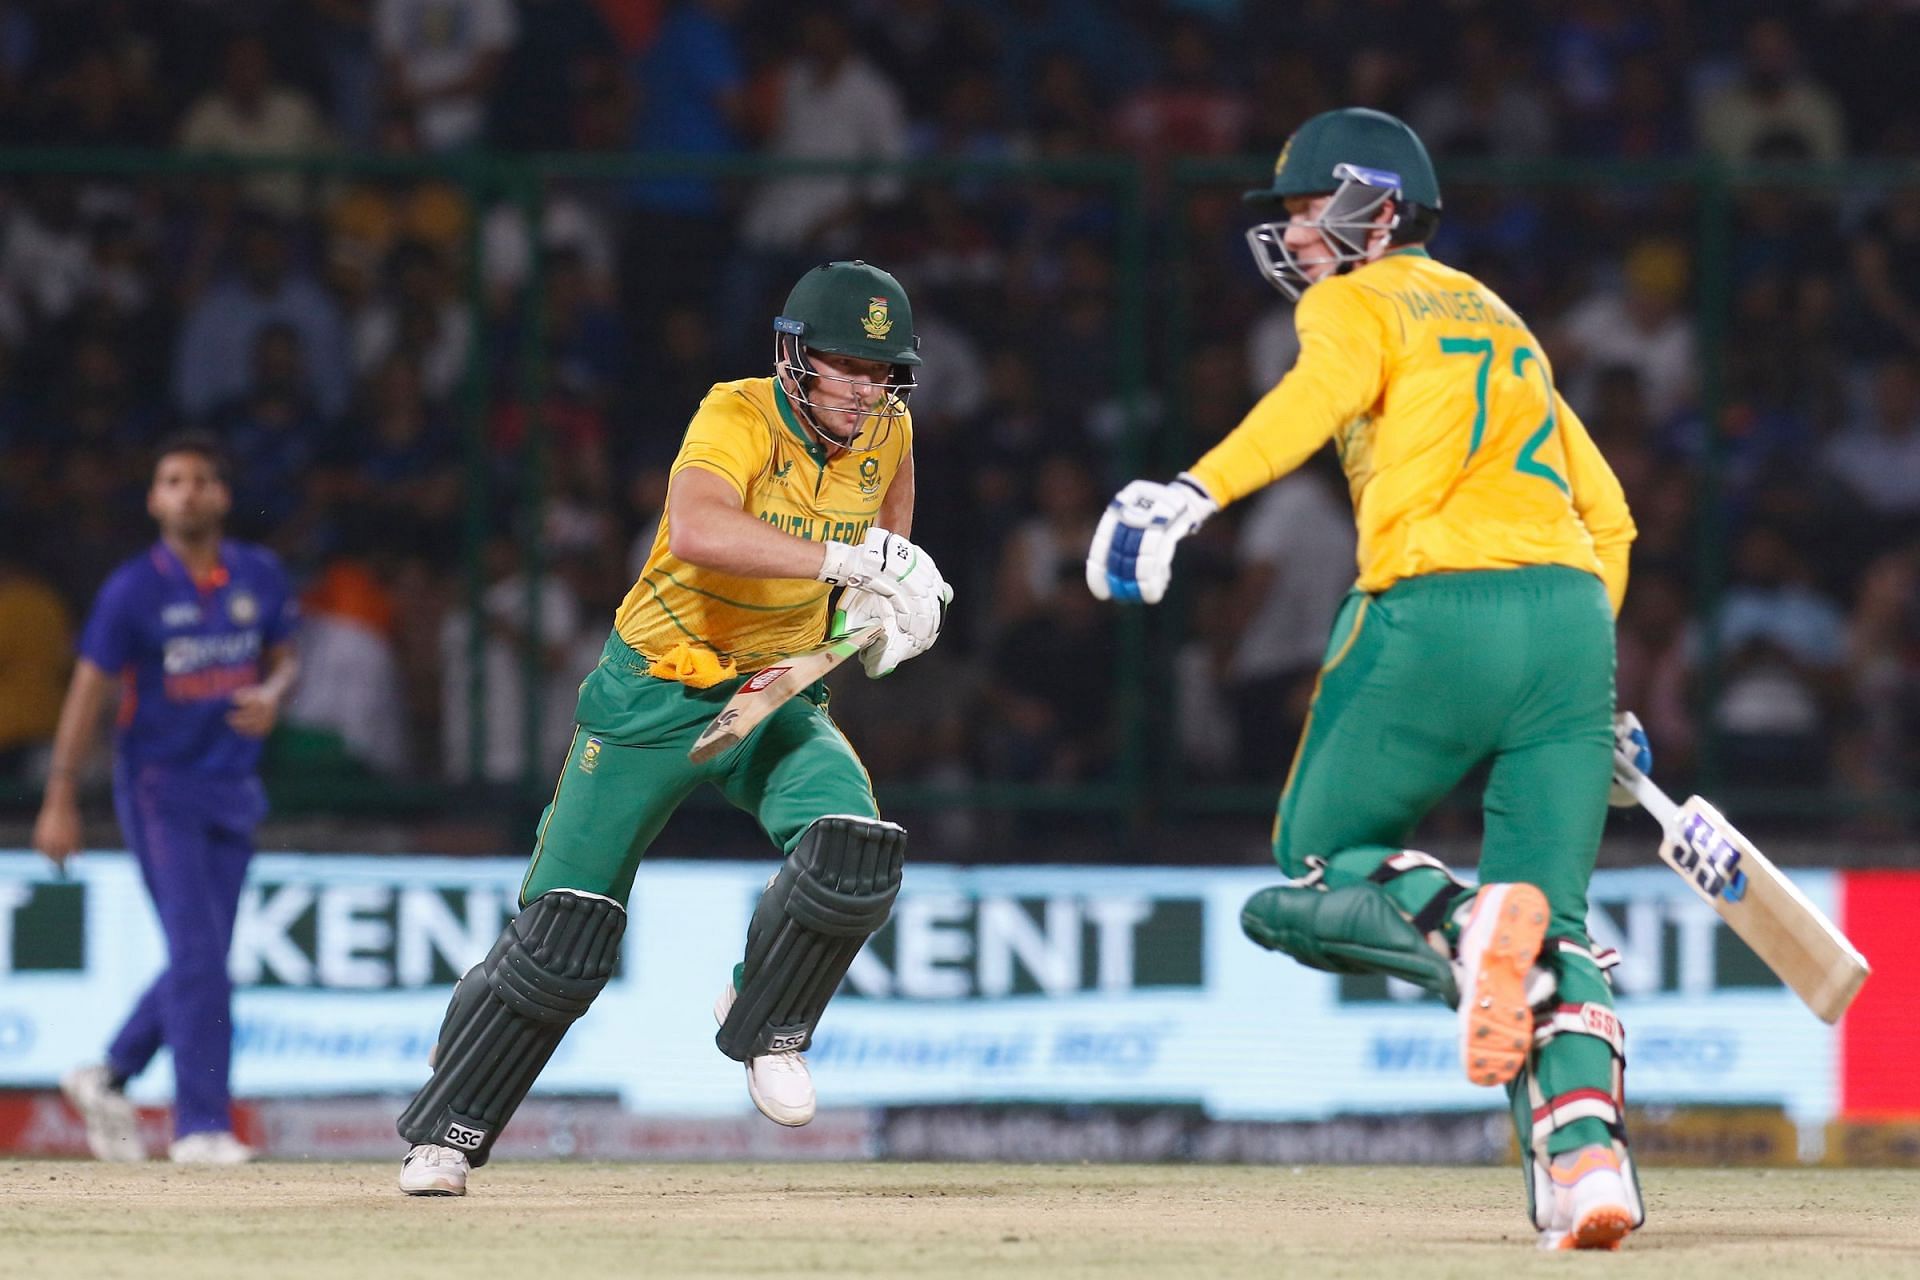 Will the Proteas begin their campaign with a win?